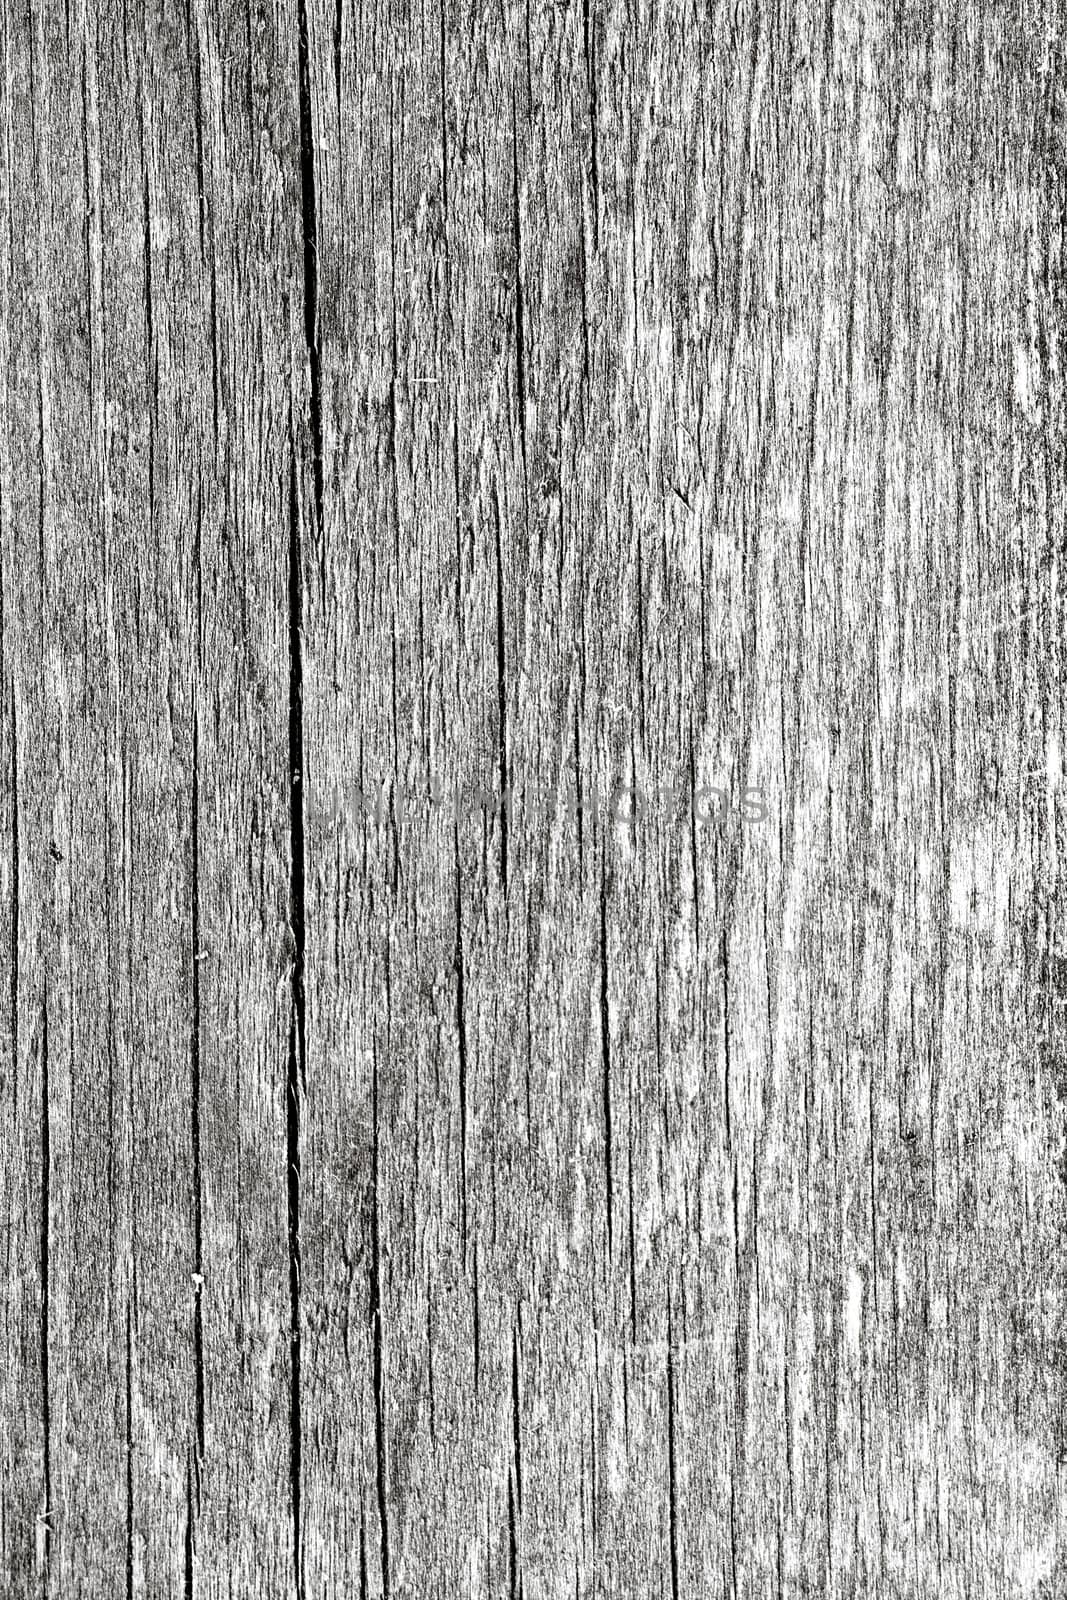 Texture of fence weathered wood background 